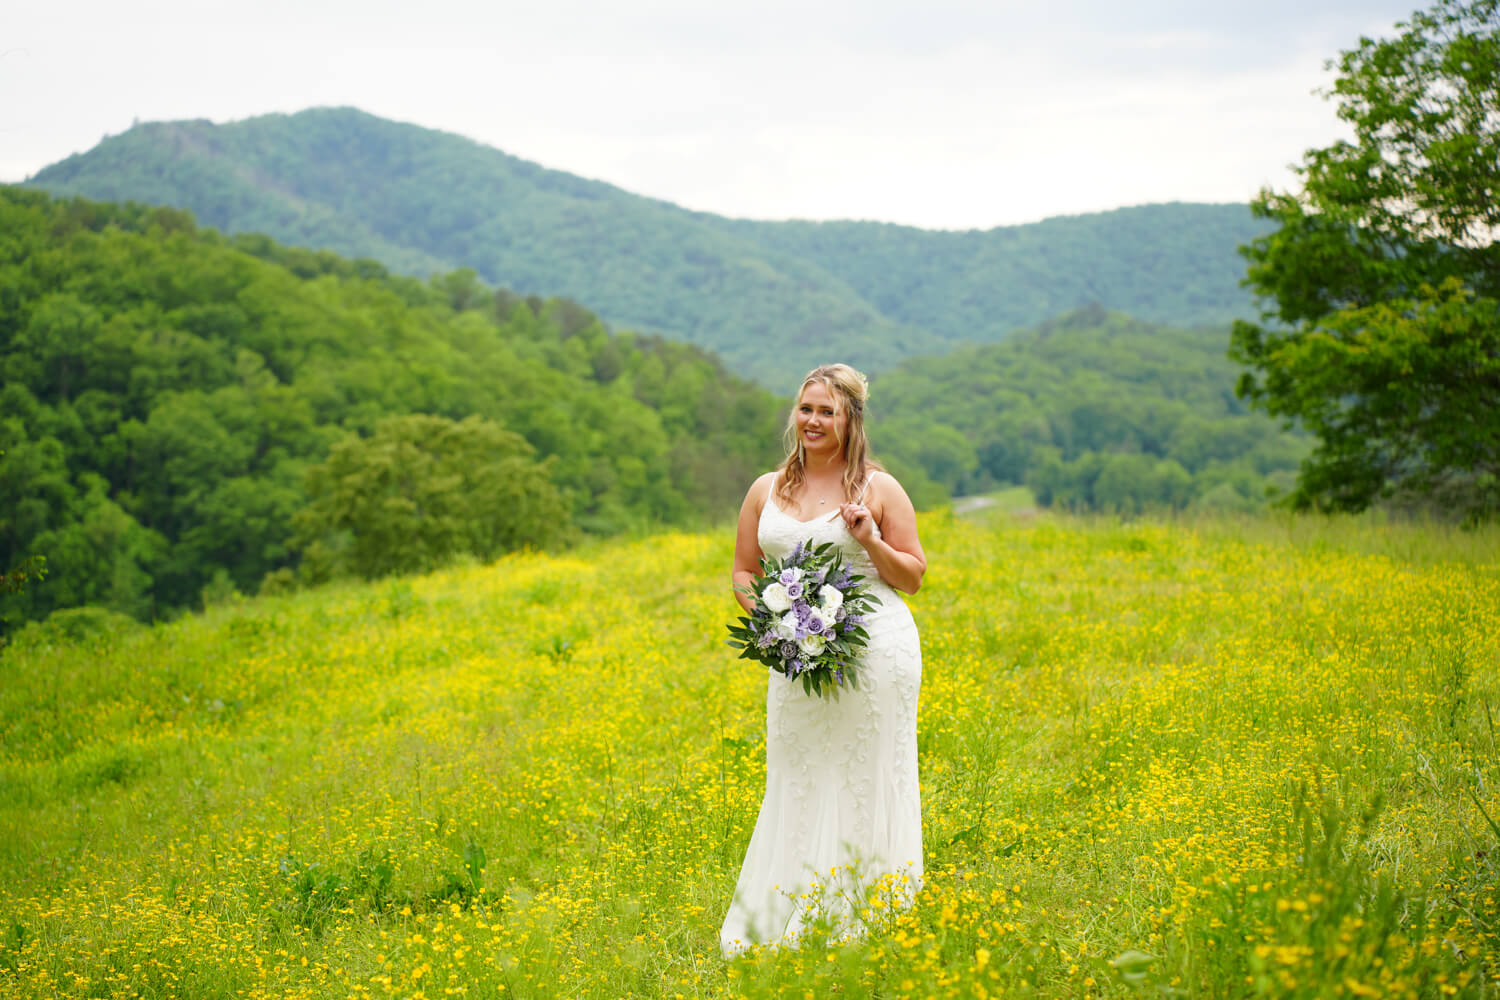 Bride playing with her hair and gazing with a smile on her face in a field of yellow buttercups at the mountain view at Honeysuckle Hills near the Great Smoky Mountains National Park in TN